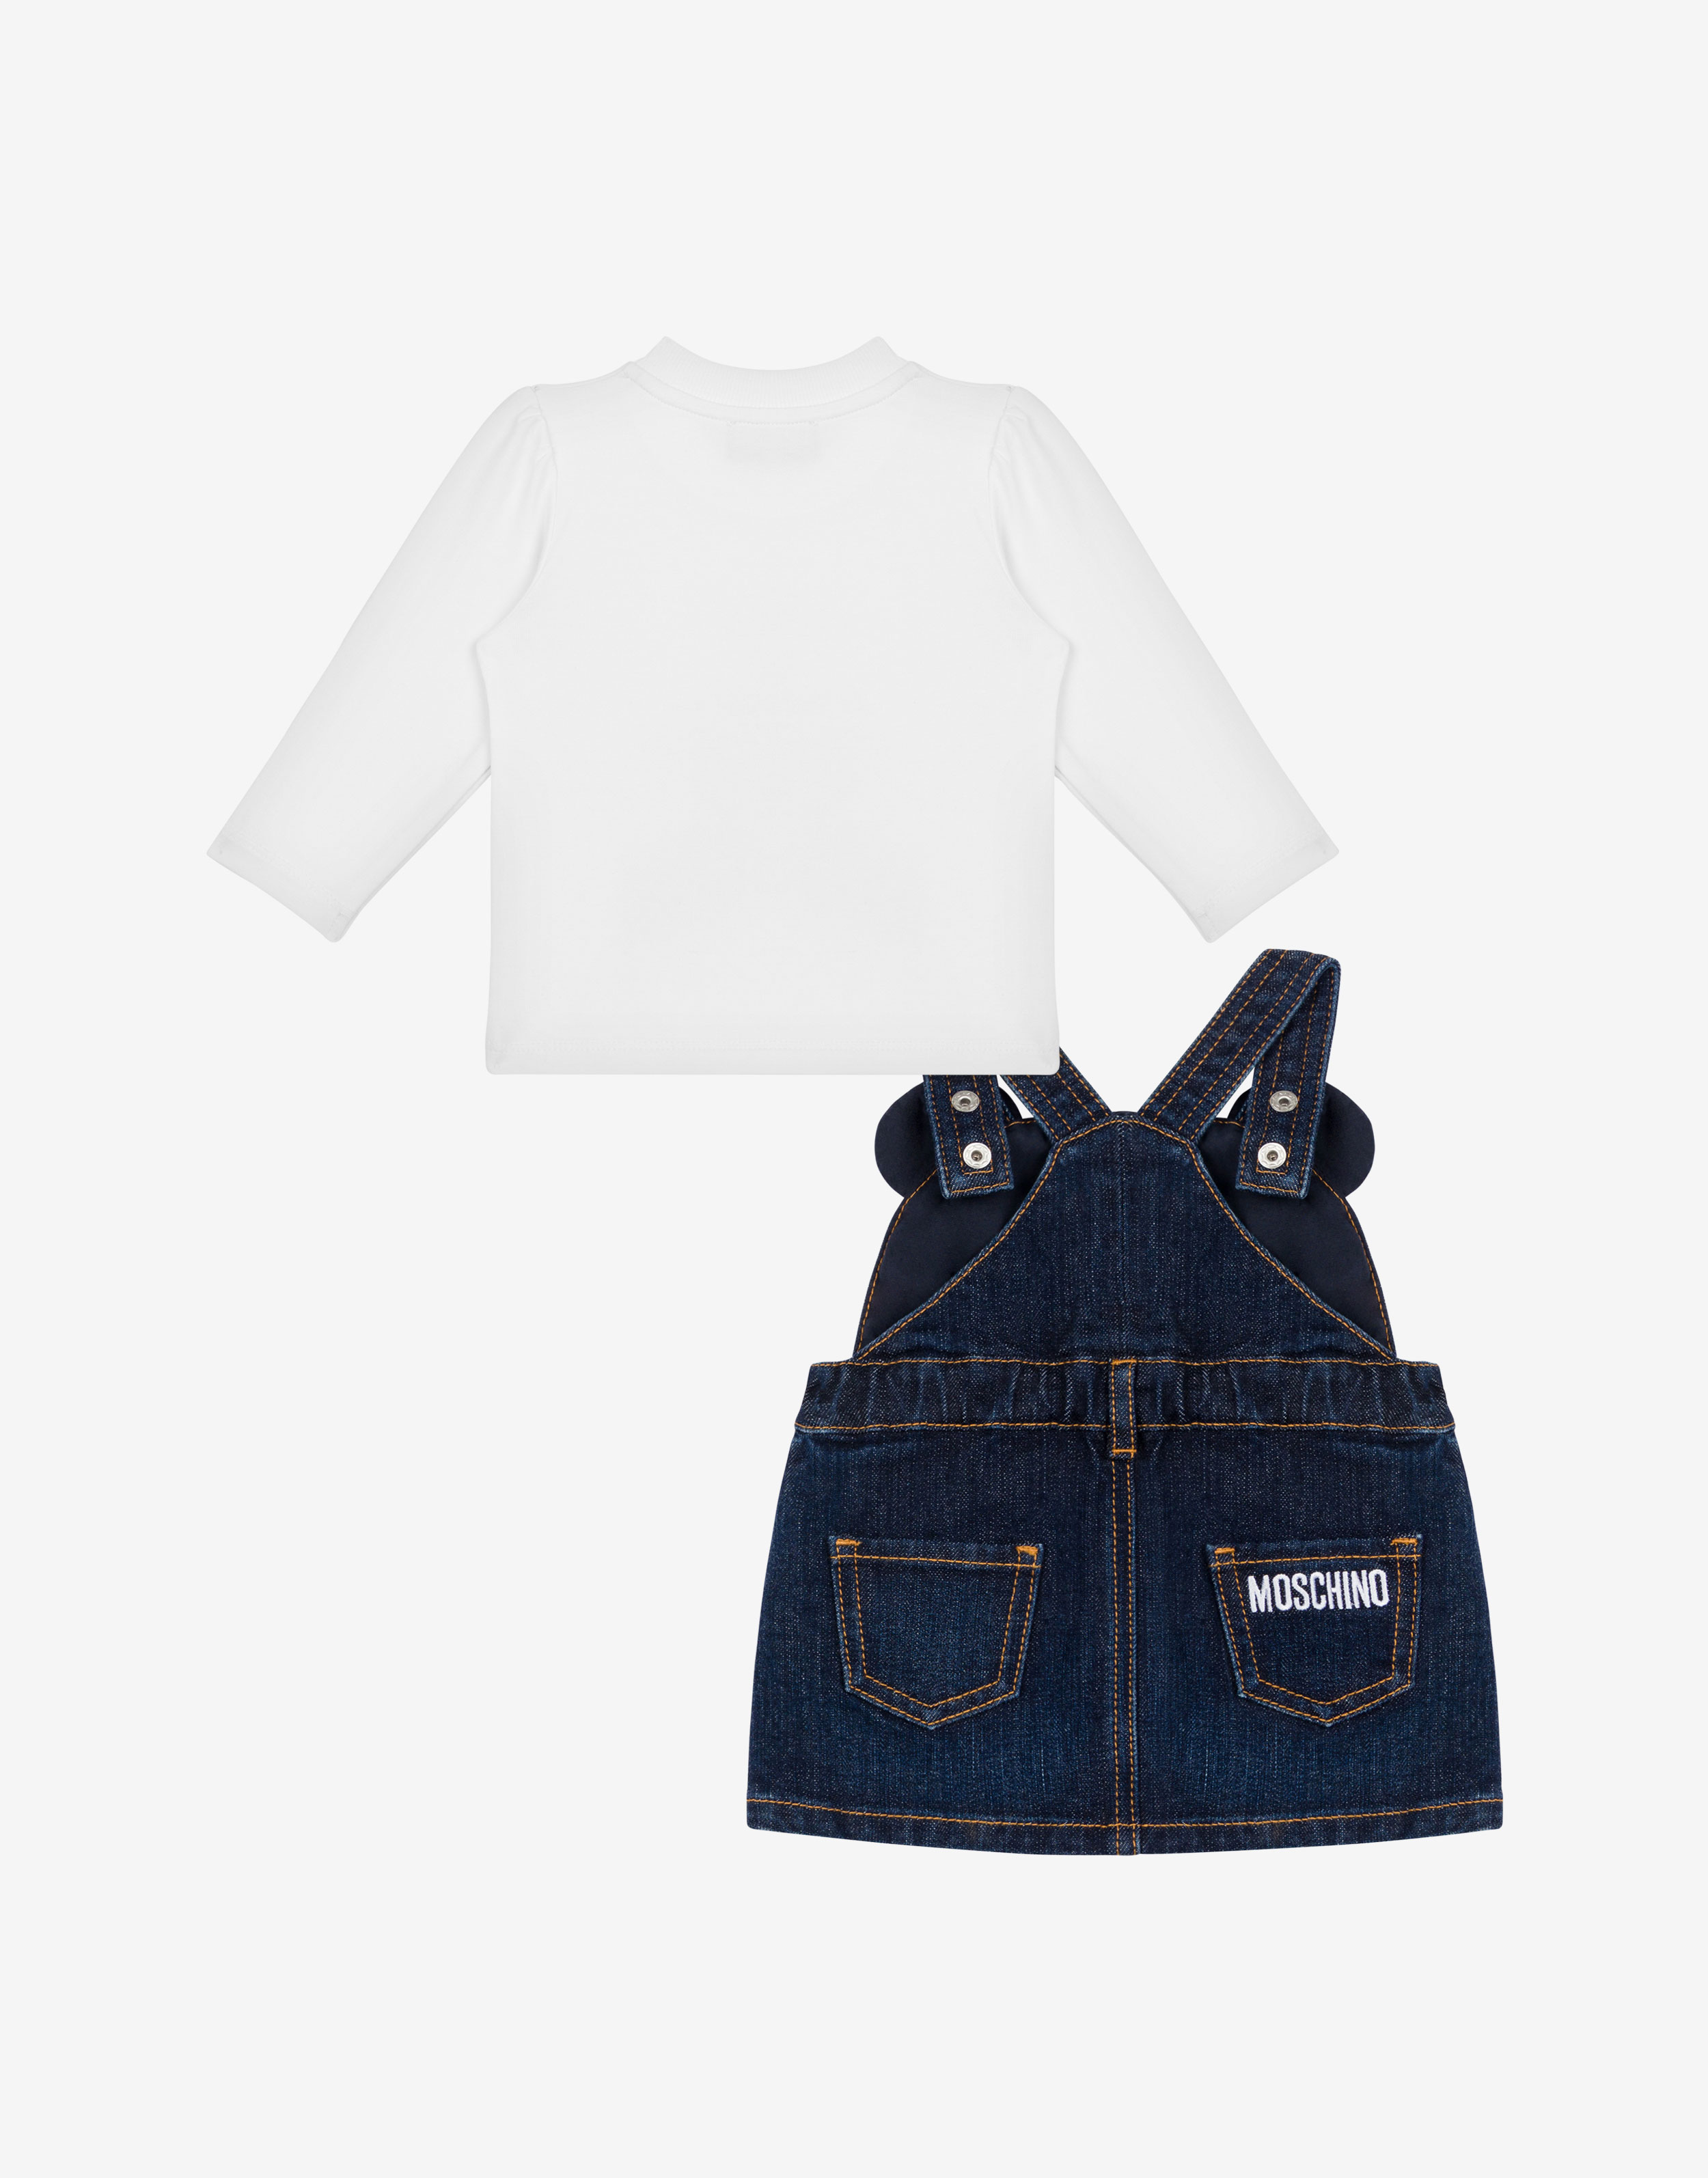 Baby Boy Outfits – Baby Beau and Belle